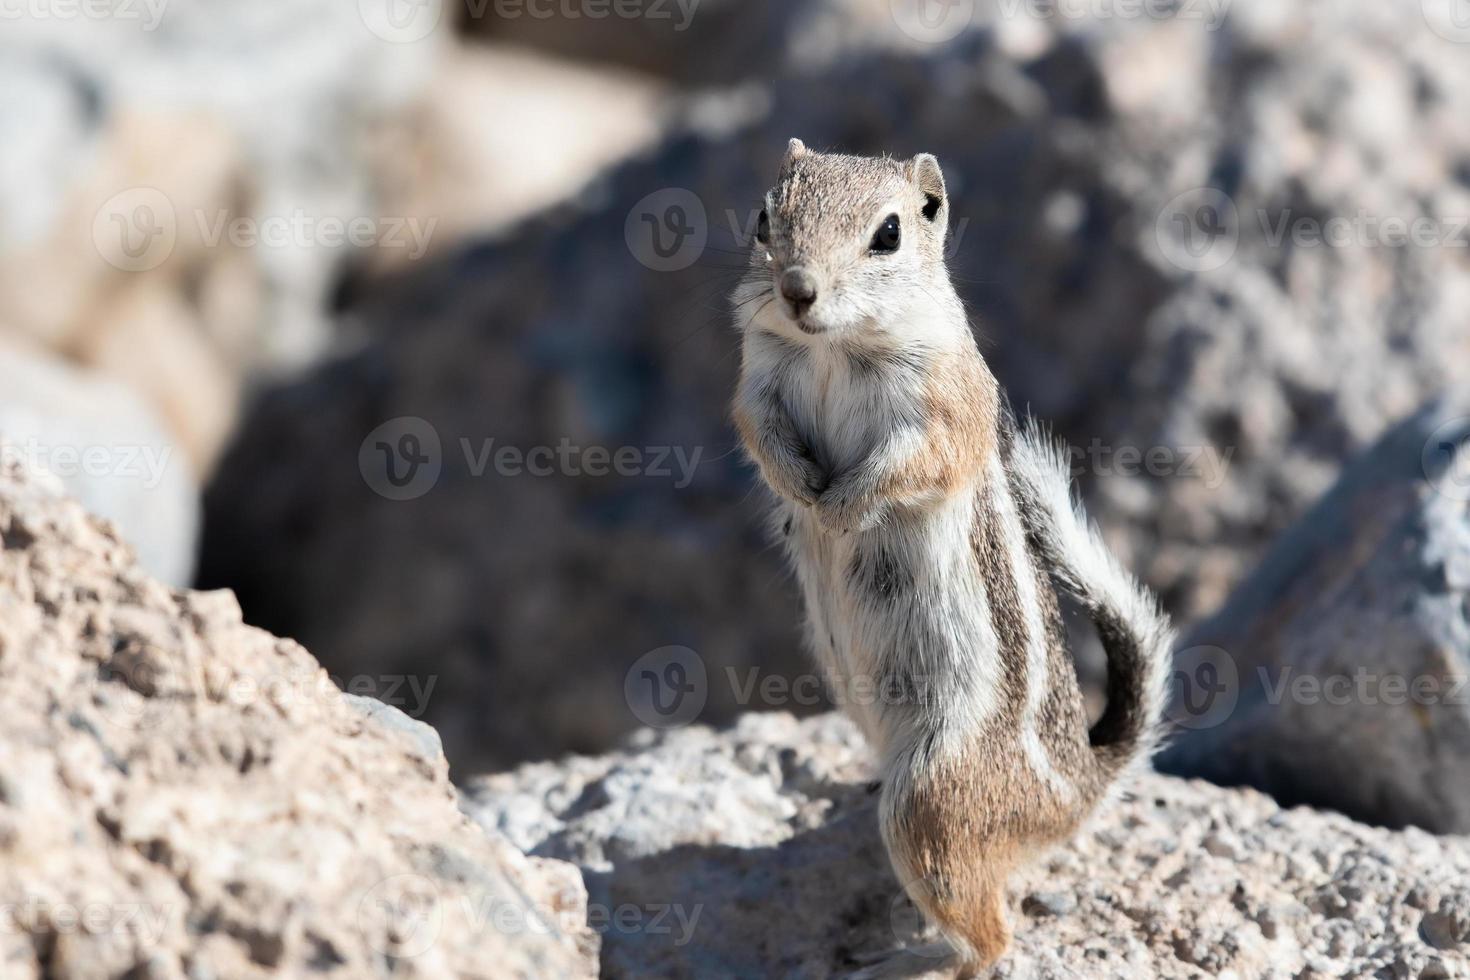 A single white tailed antelope squirrel photo